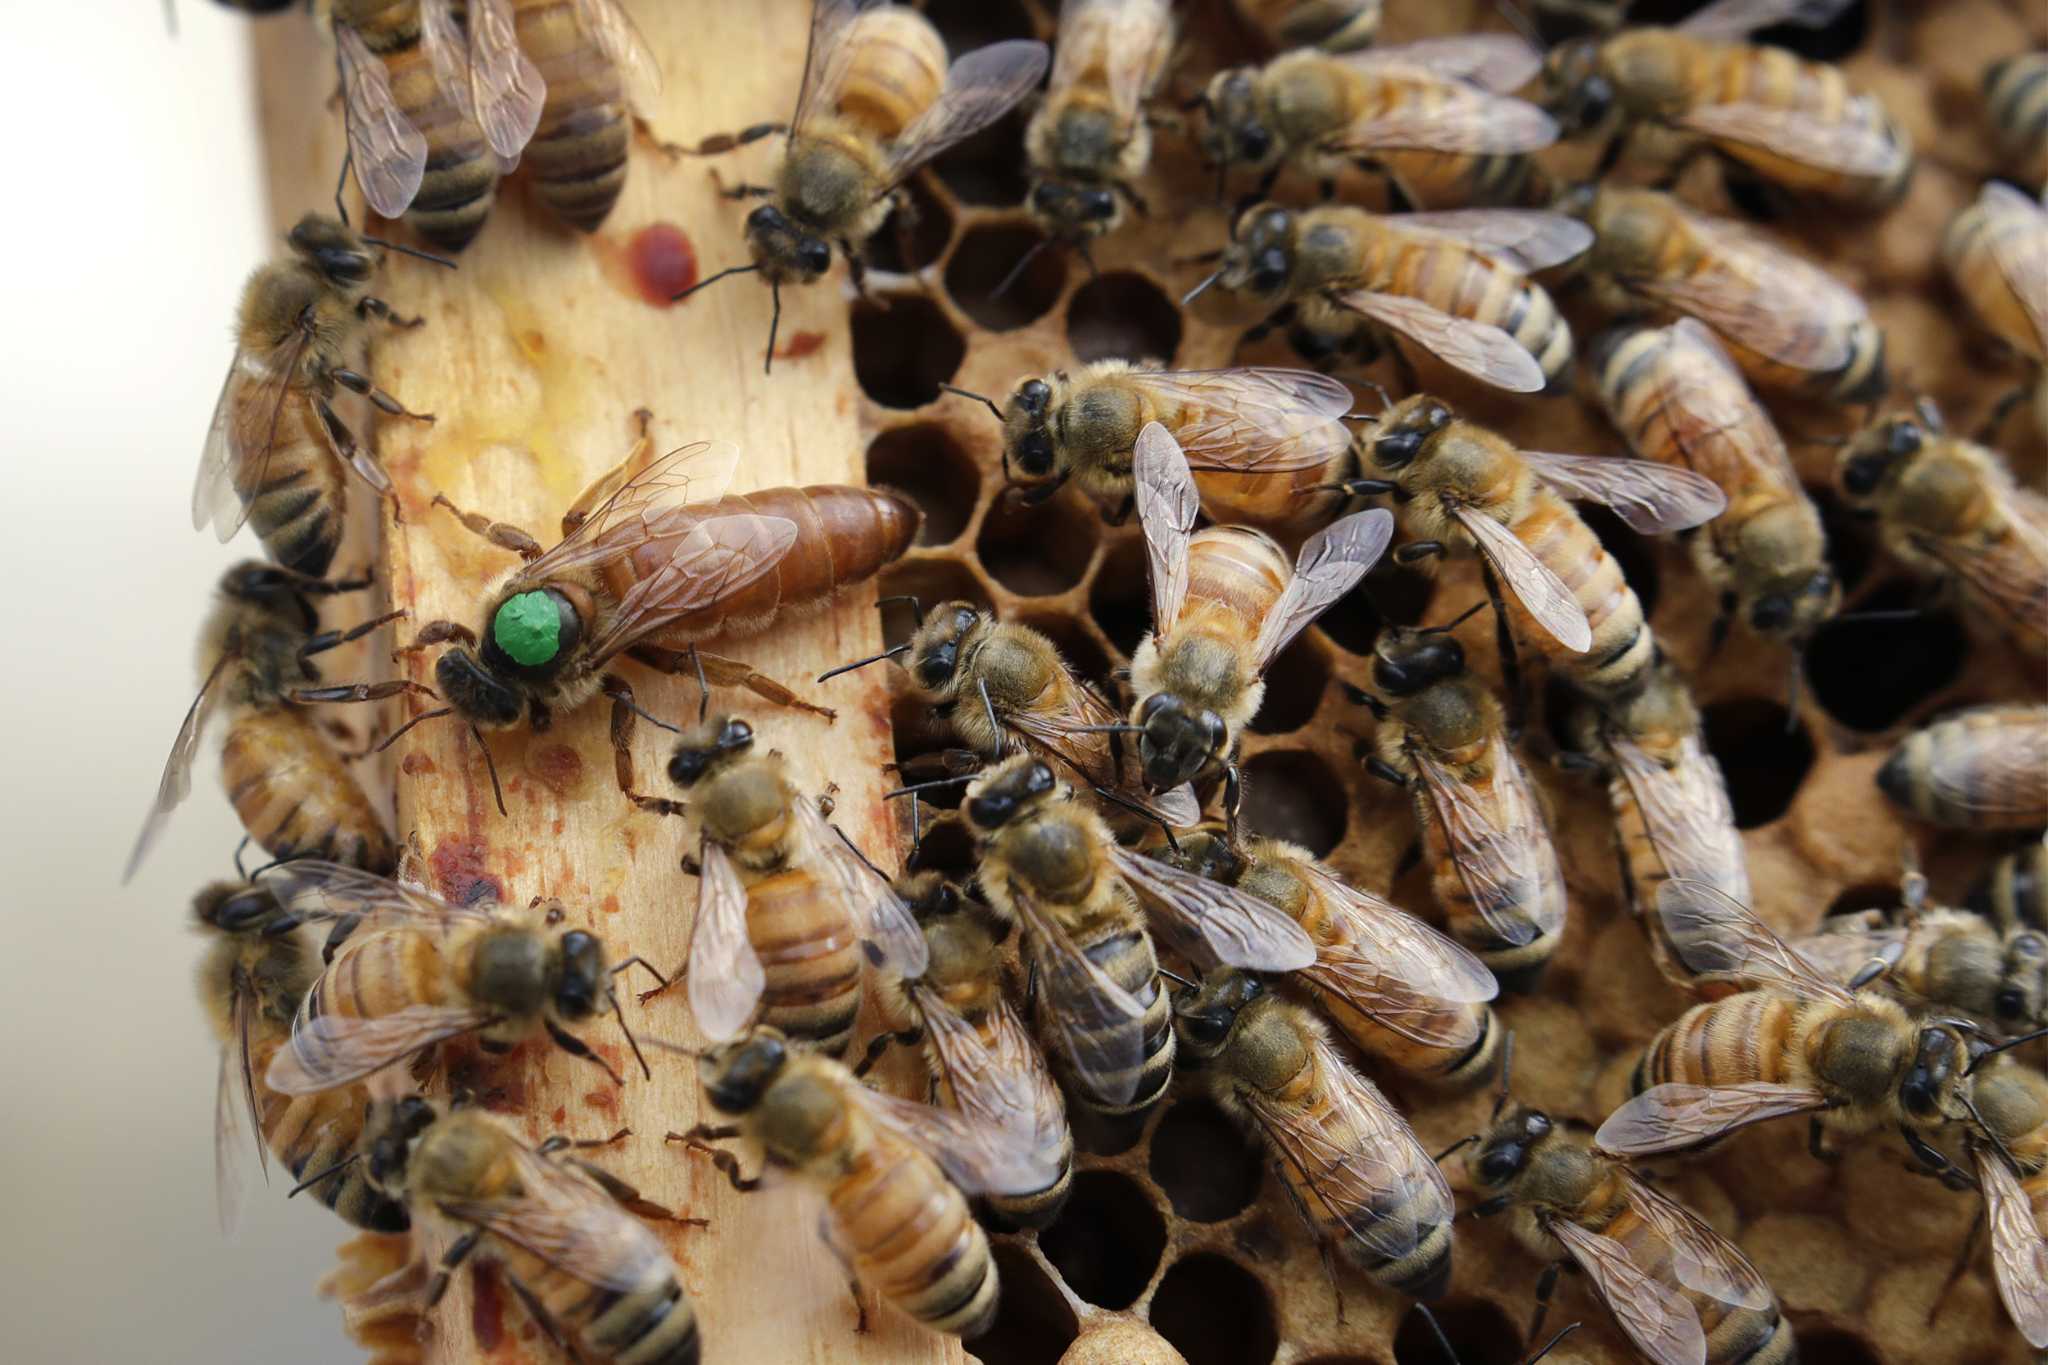 US honeybees are doing better after bad year, survey reveals